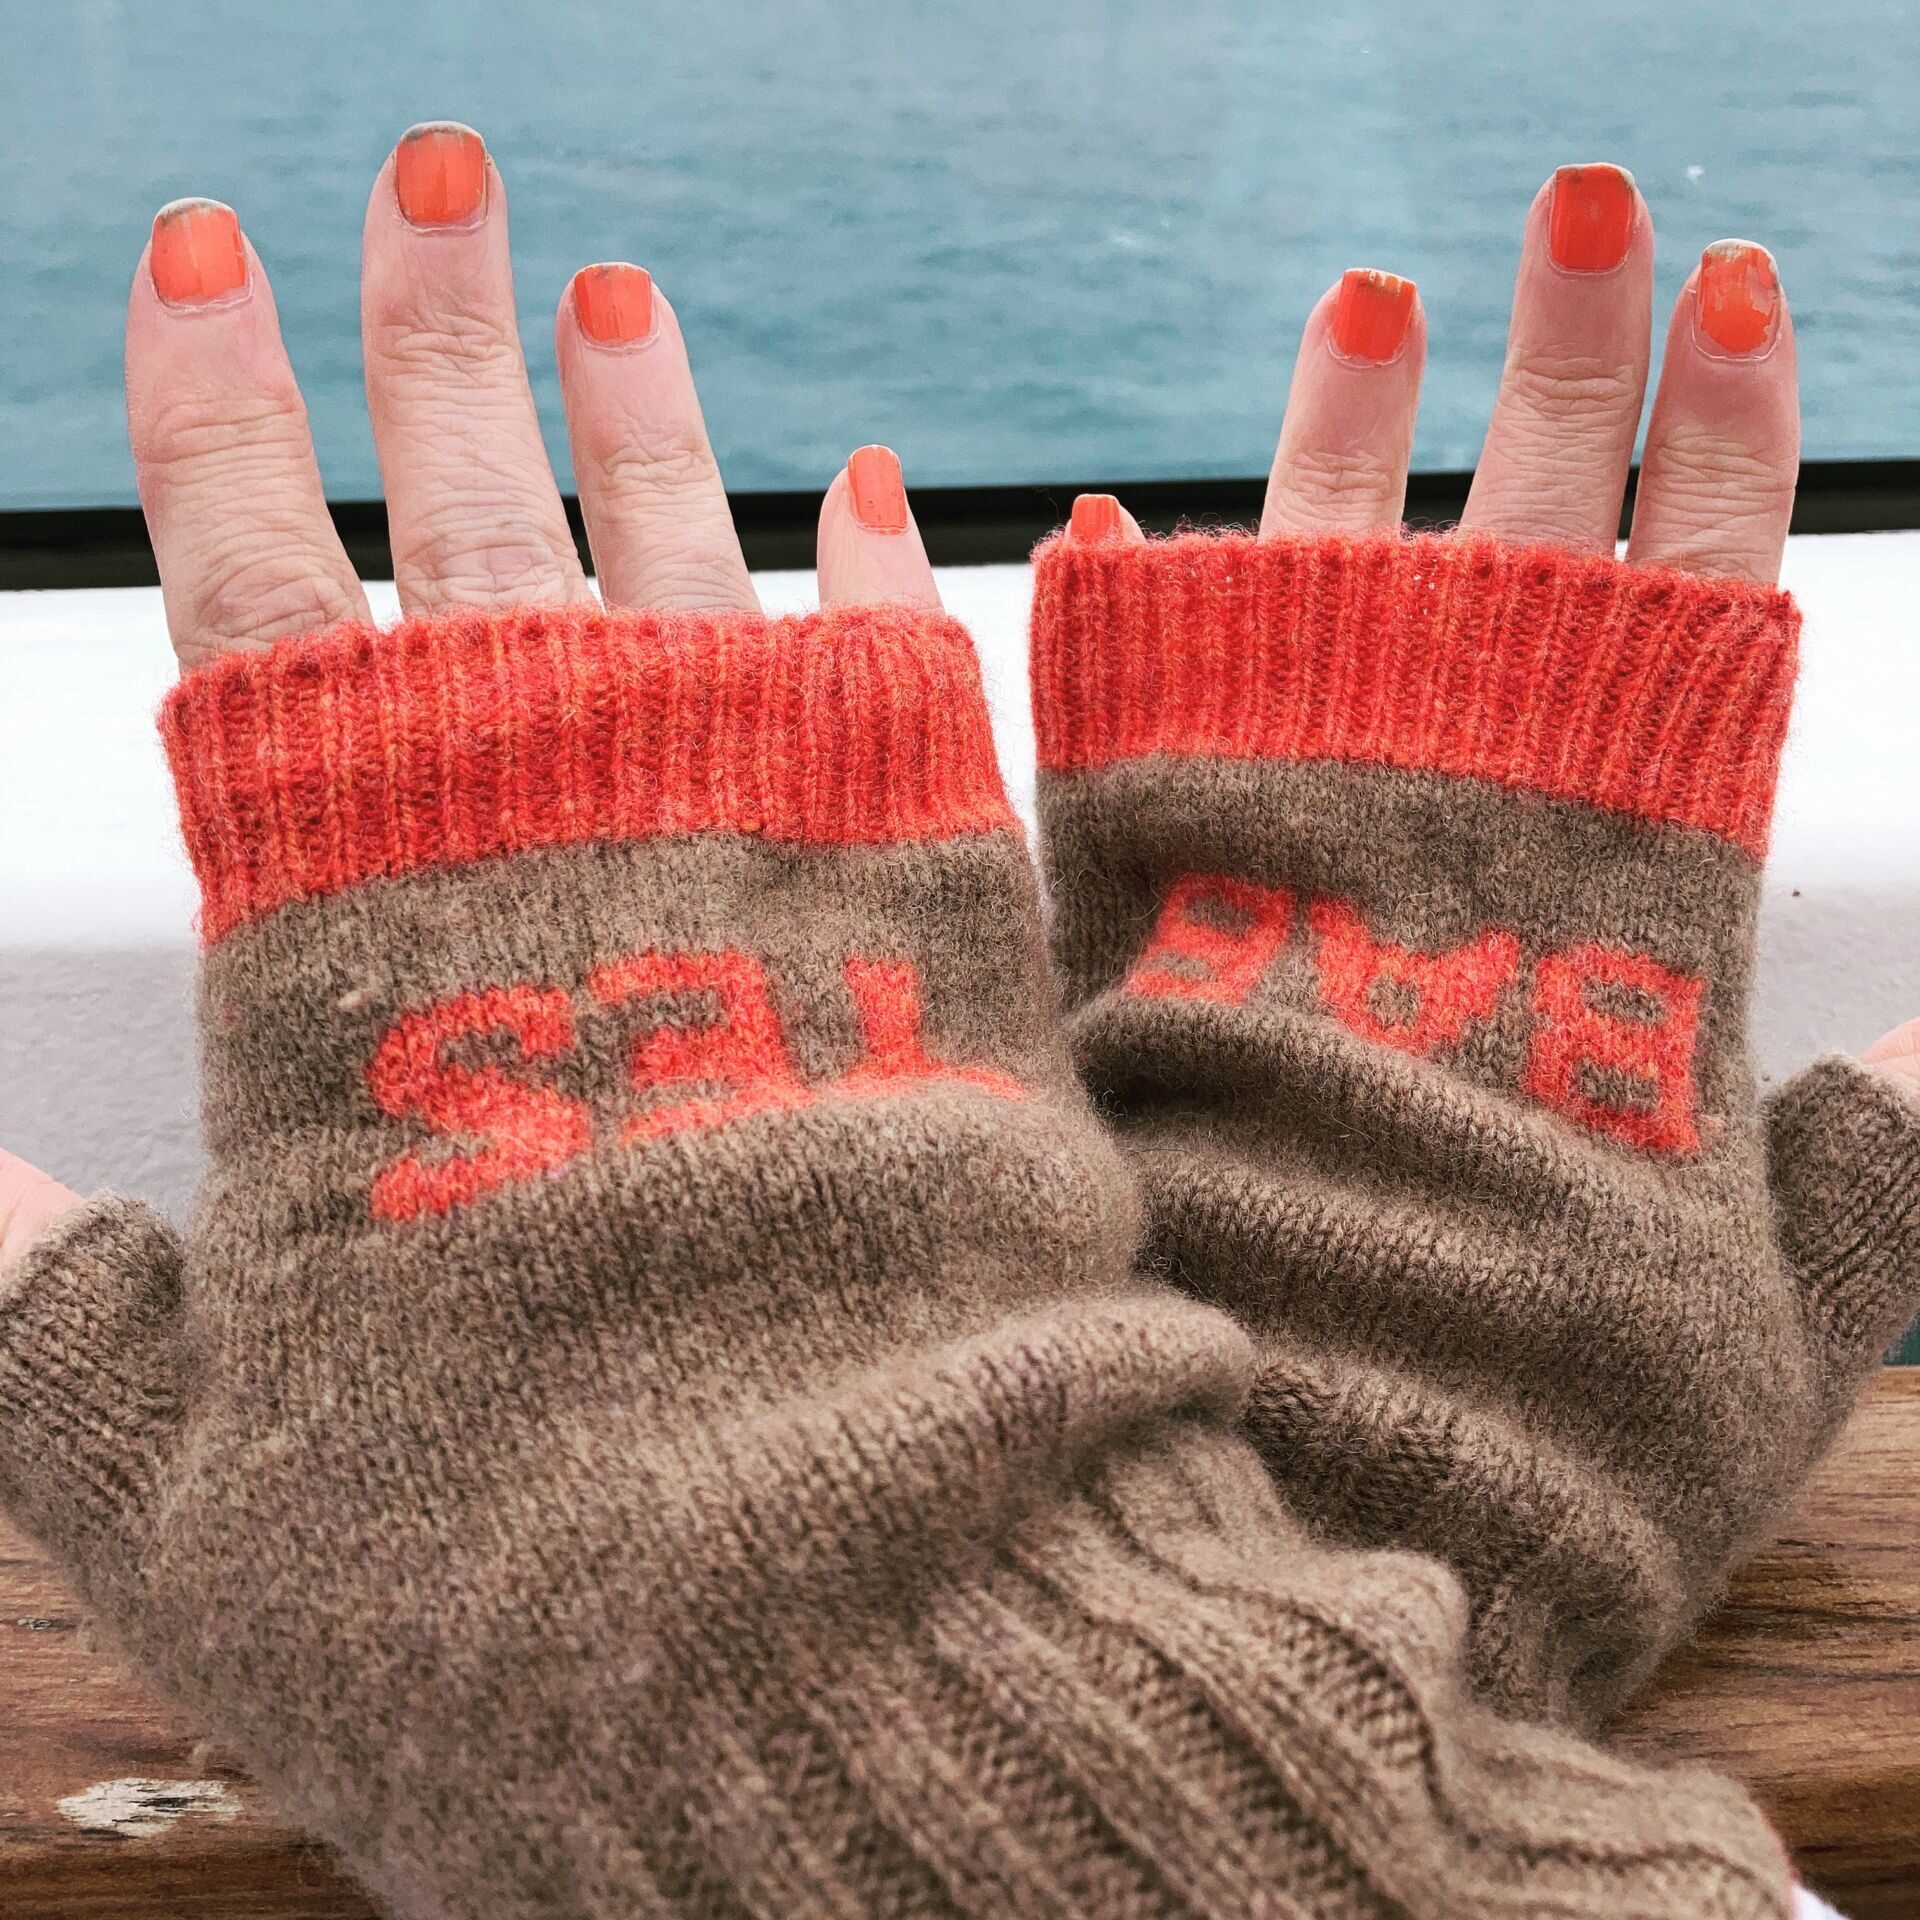 Packing for a Norwegian Fjords Cruise in May | Hands clad in brown and orange mittens with Yes Bab printed on them